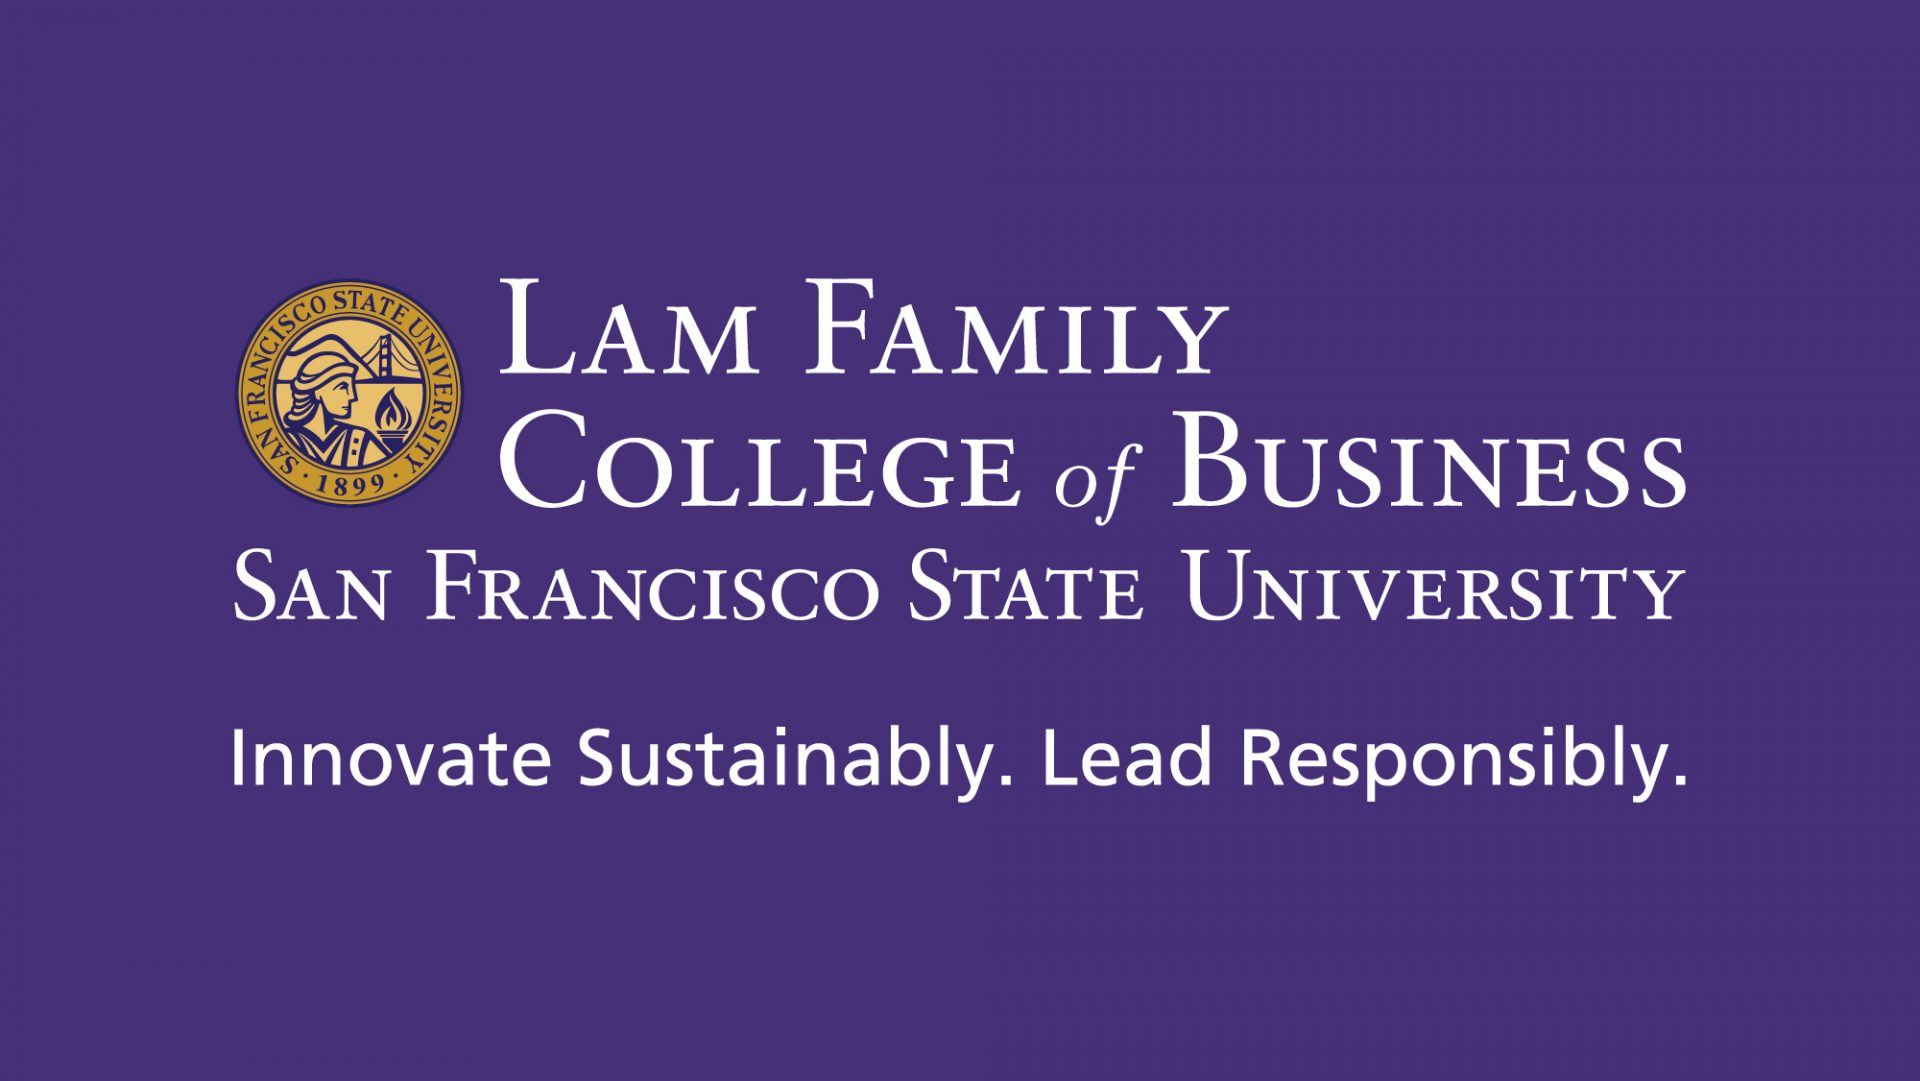 Lam Family College of Business